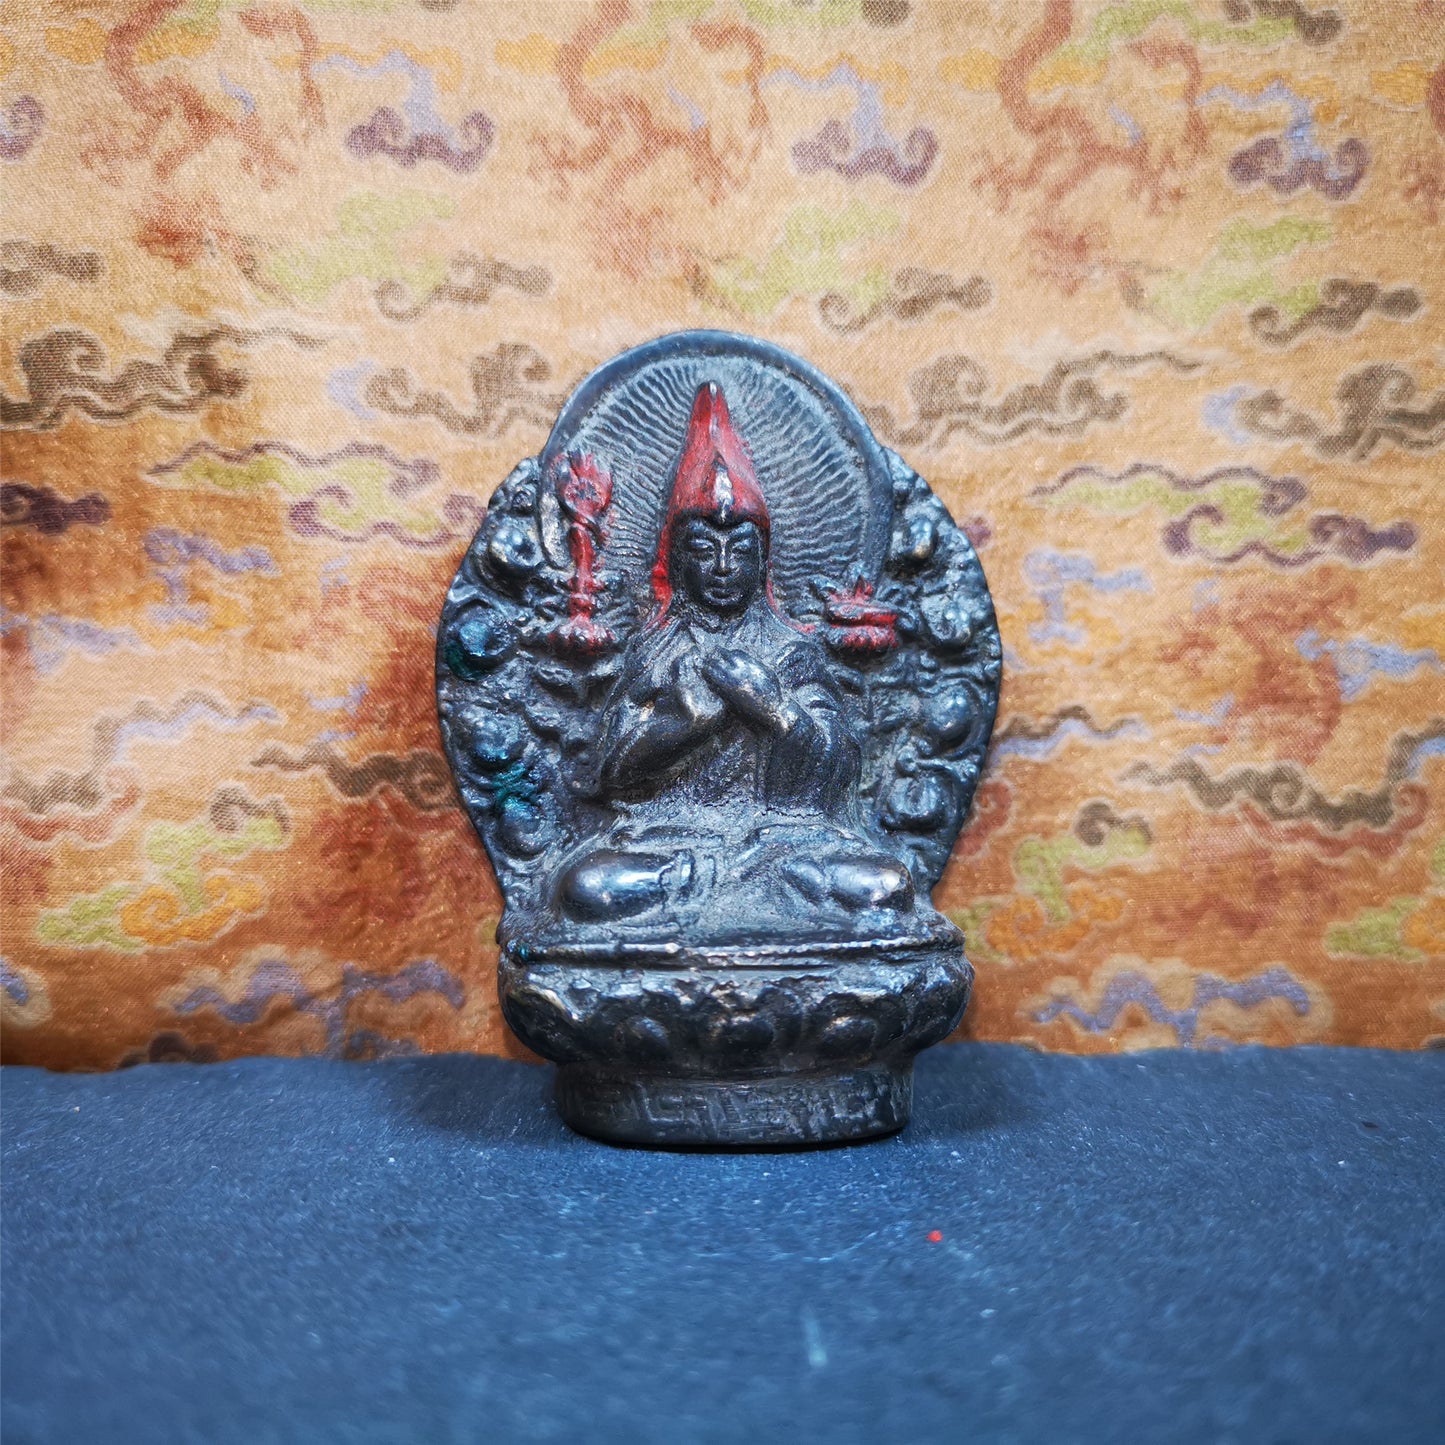 This Je Tsongkhapa statue was collected from Samye Monastray, the first monastery in Tibet,and important Nyingma monsatery. It's an old-fashioned Je Tsongkhapa statue,made of copper,painted with colors,about 60 years old. Tsongkhapa was a famous teacher of Tibetan Buddhism whose activities led to the formation of the Gelug school of Tibetan Buddhism.